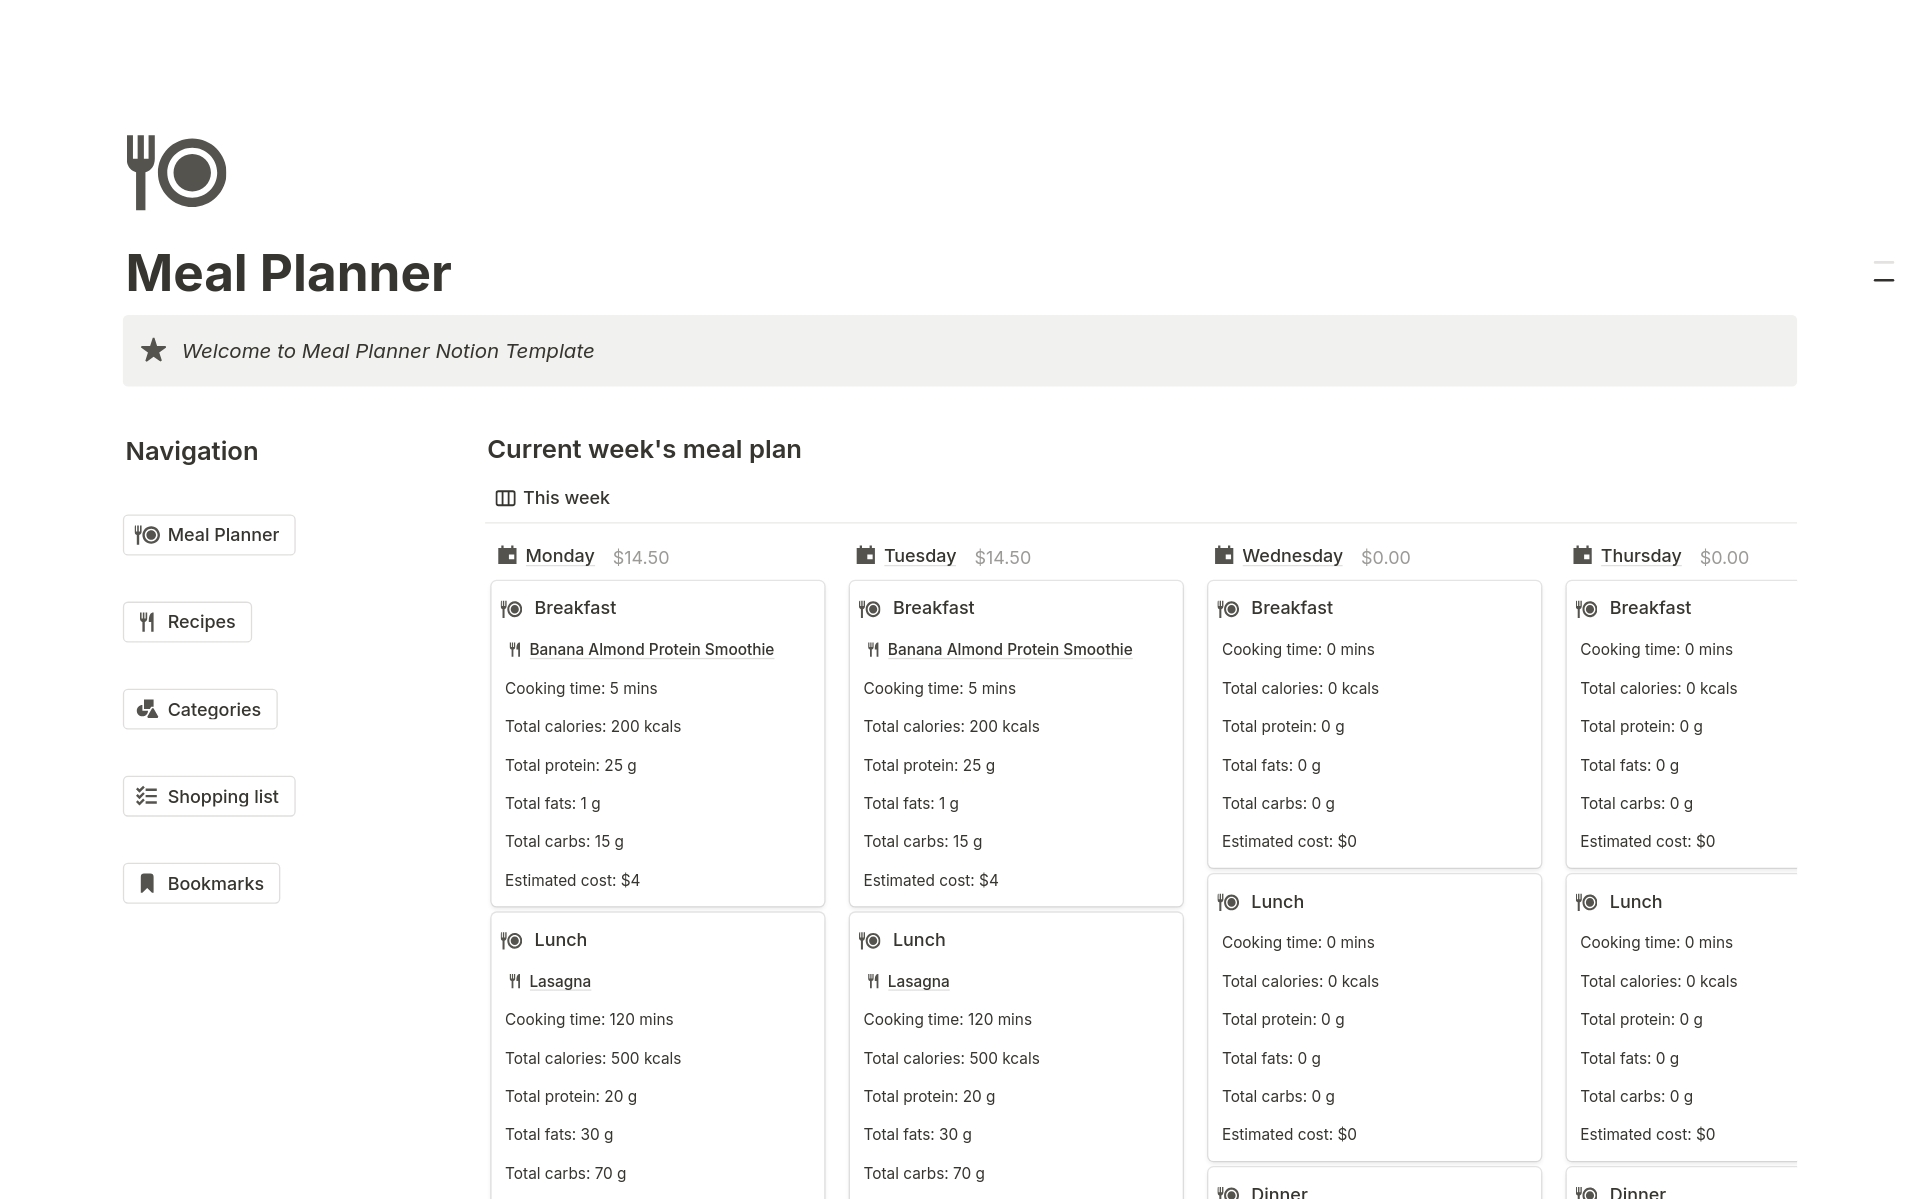 Meal Planner Notion Template 
A simple solution to plan your meal for the week, manage recipes, and track your shopping list